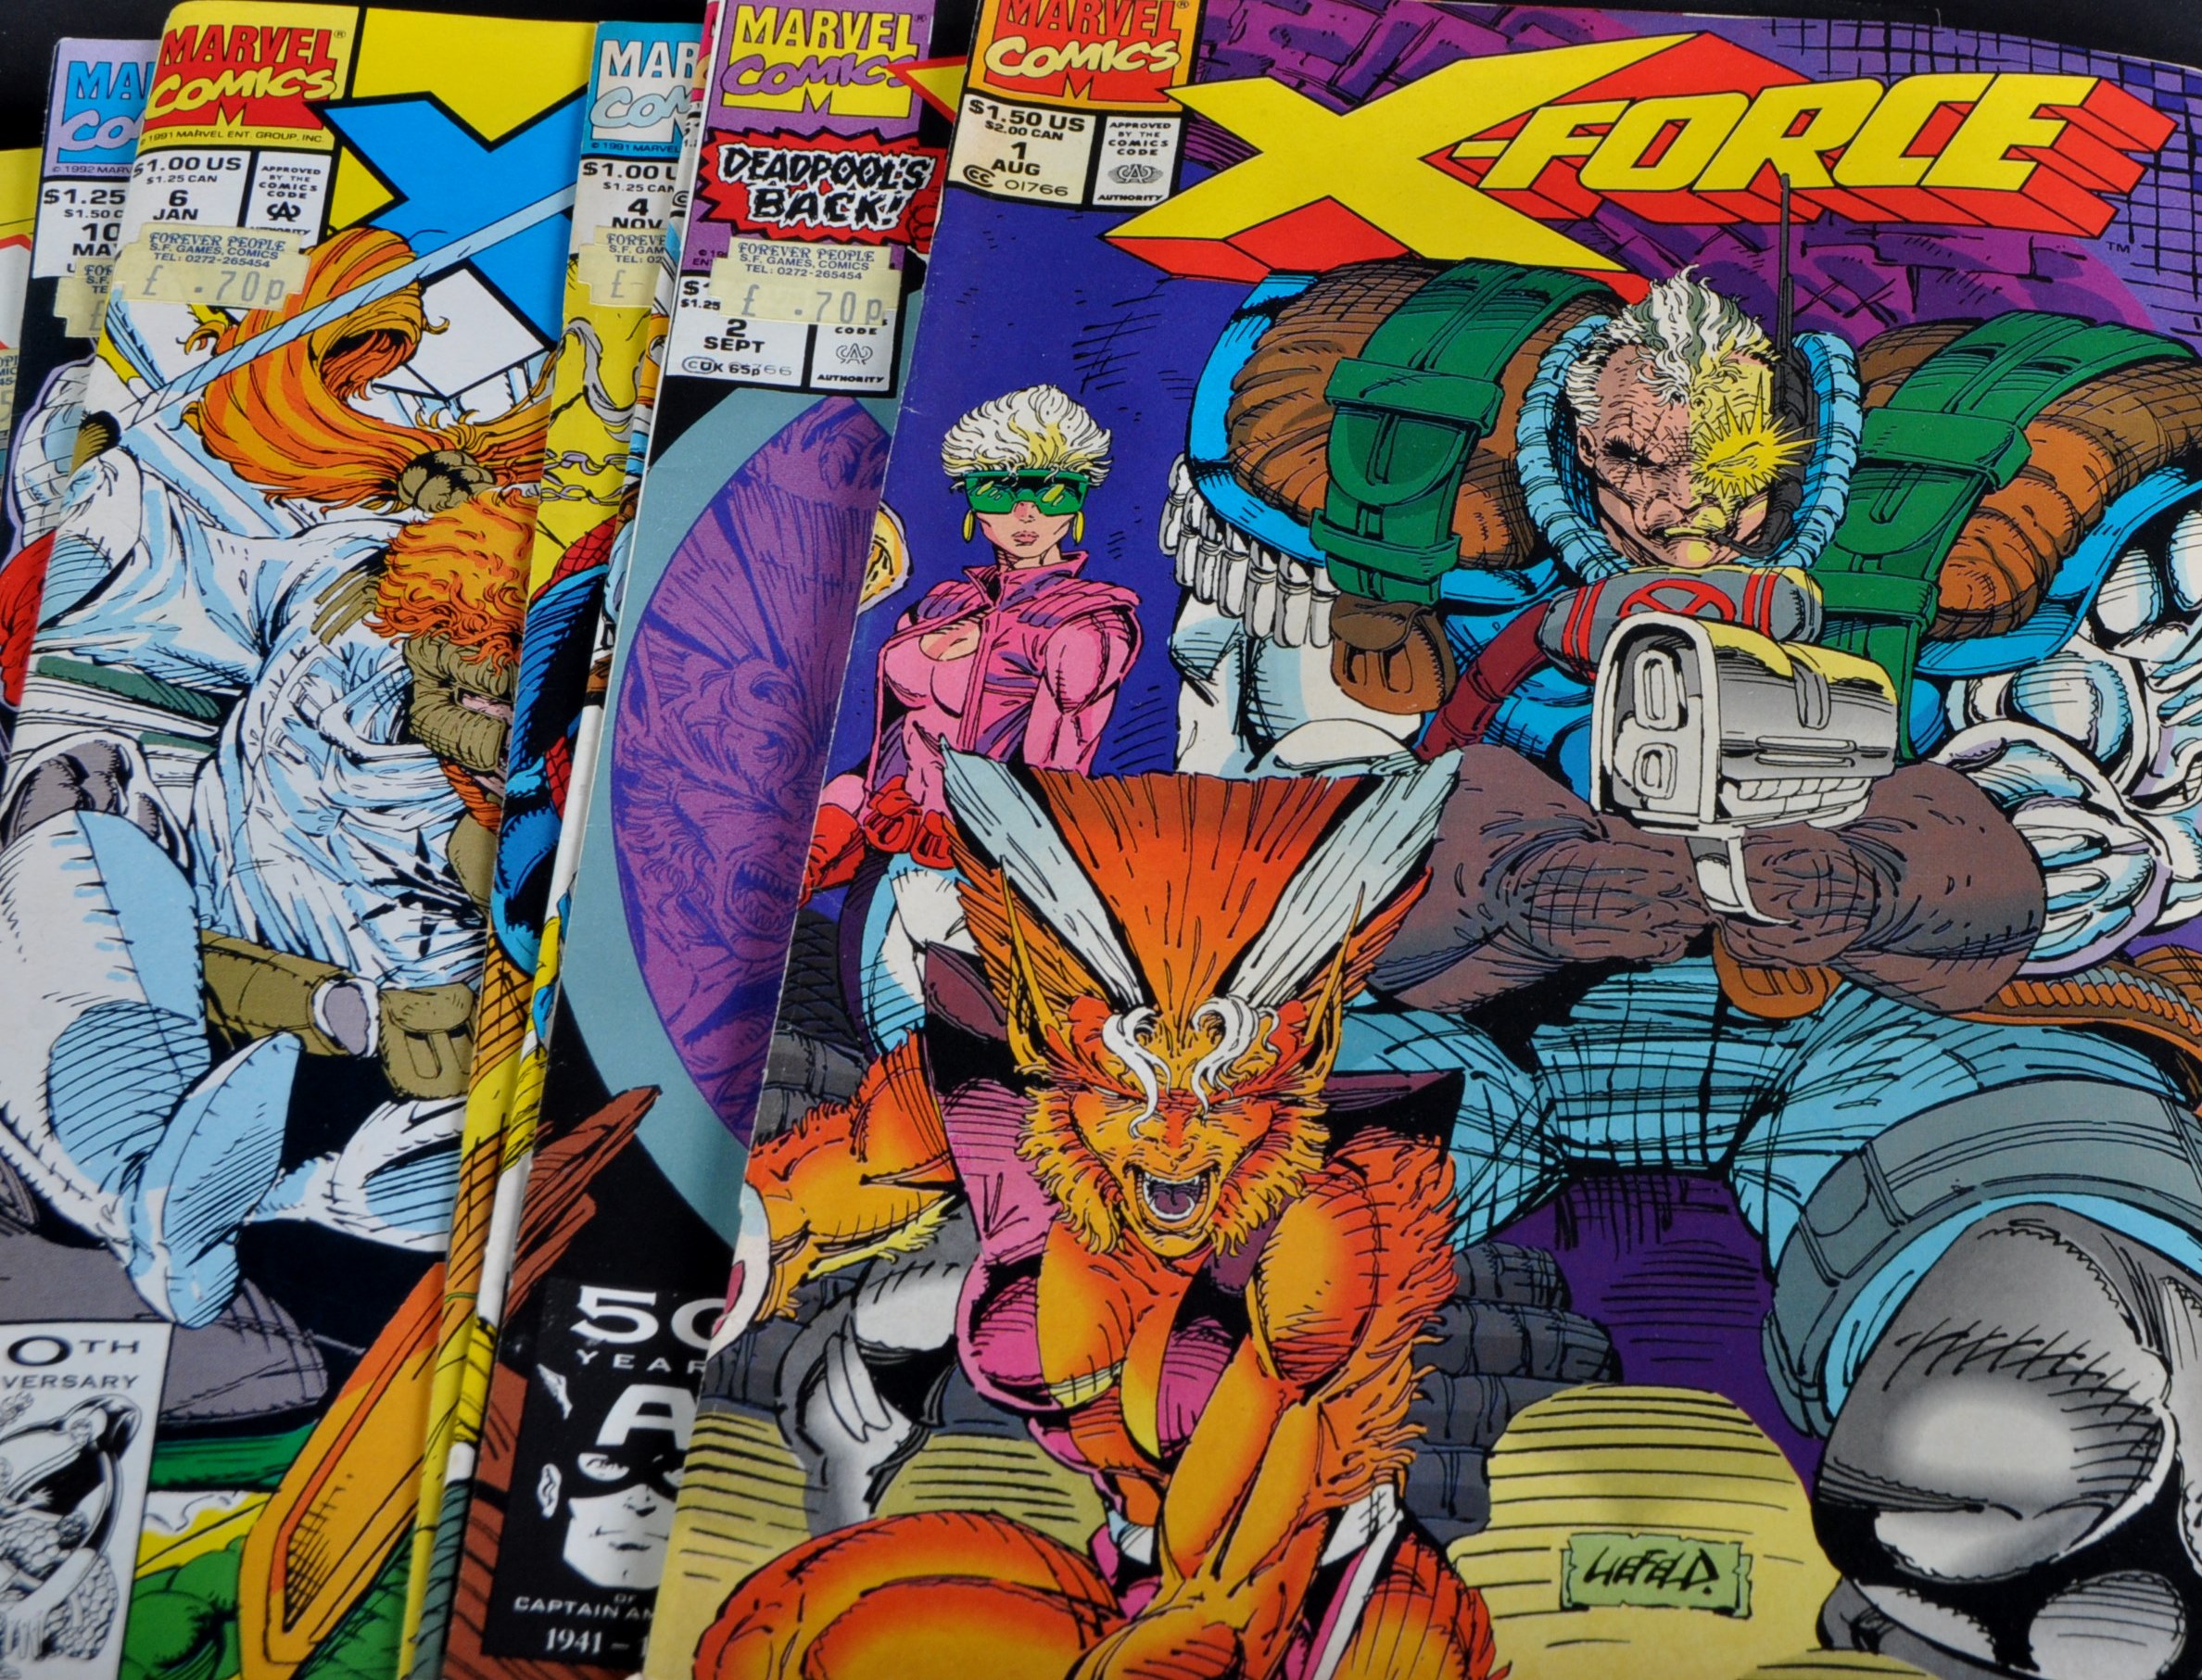 MARVEL COMICS - X-FORCE - COLLECTION OF COMIC BOOKS - Image 2 of 5